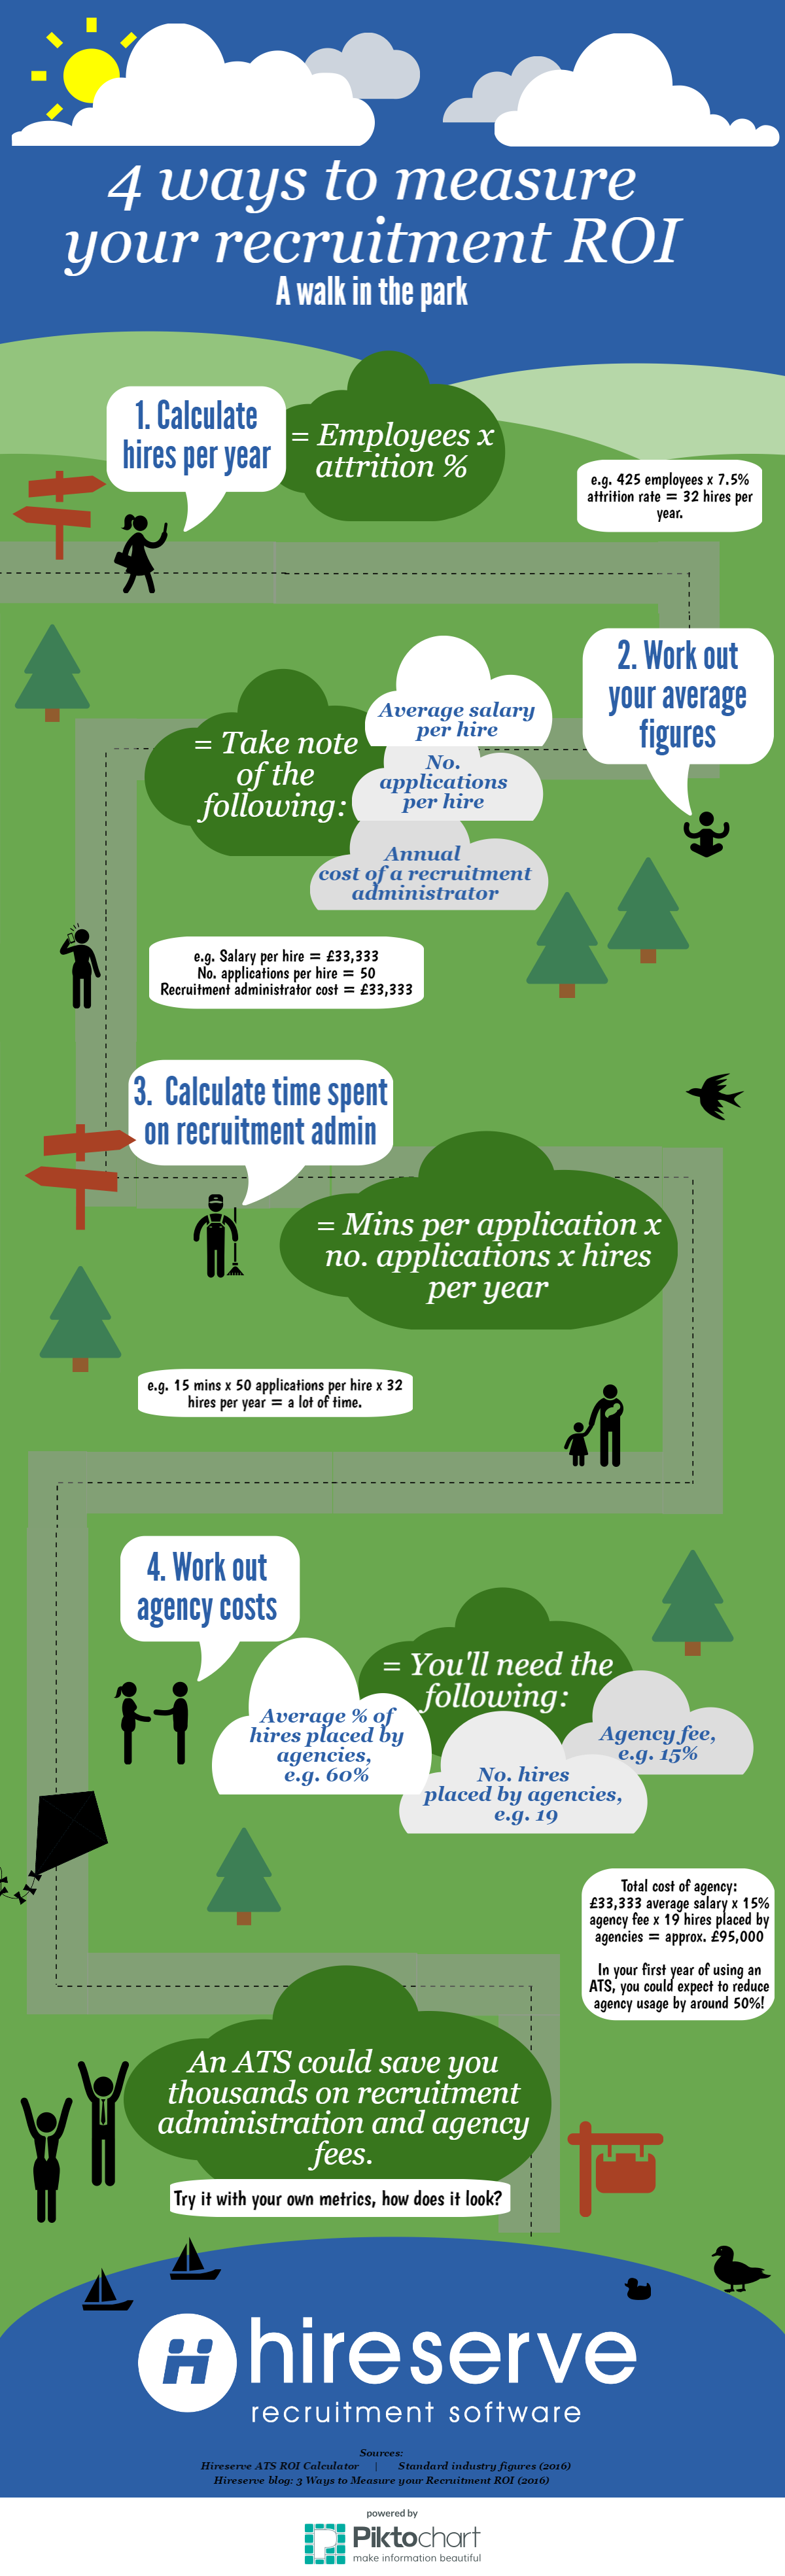 4 ways to measure your recruitment ROI infographic